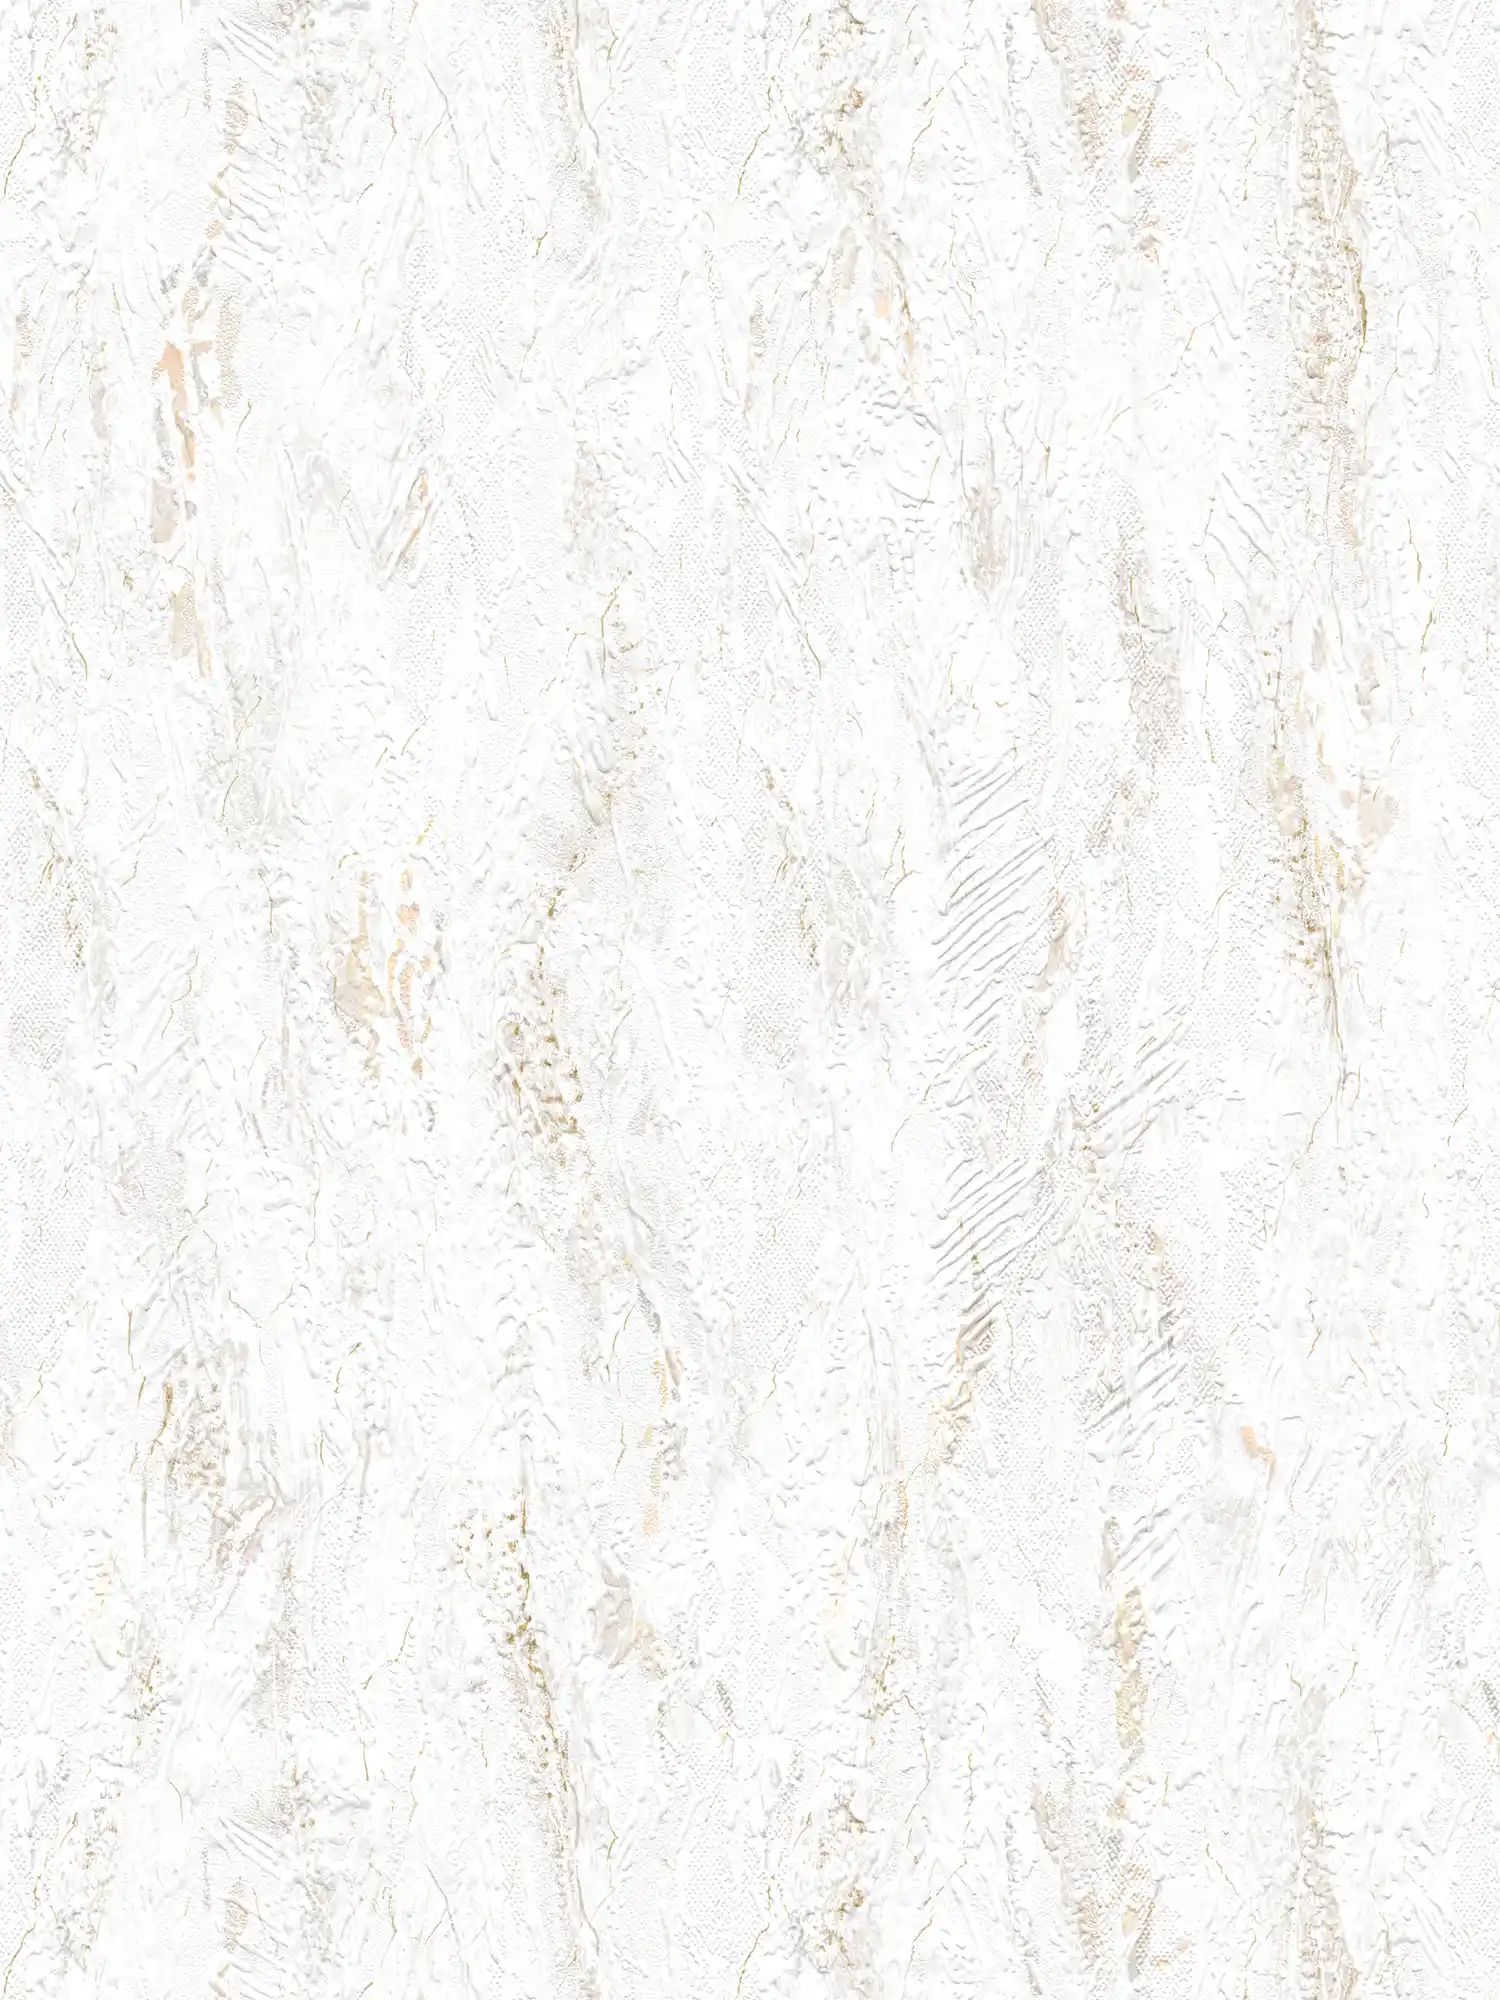 Rustic plaster look wallpaper with hatching & colour pattern
